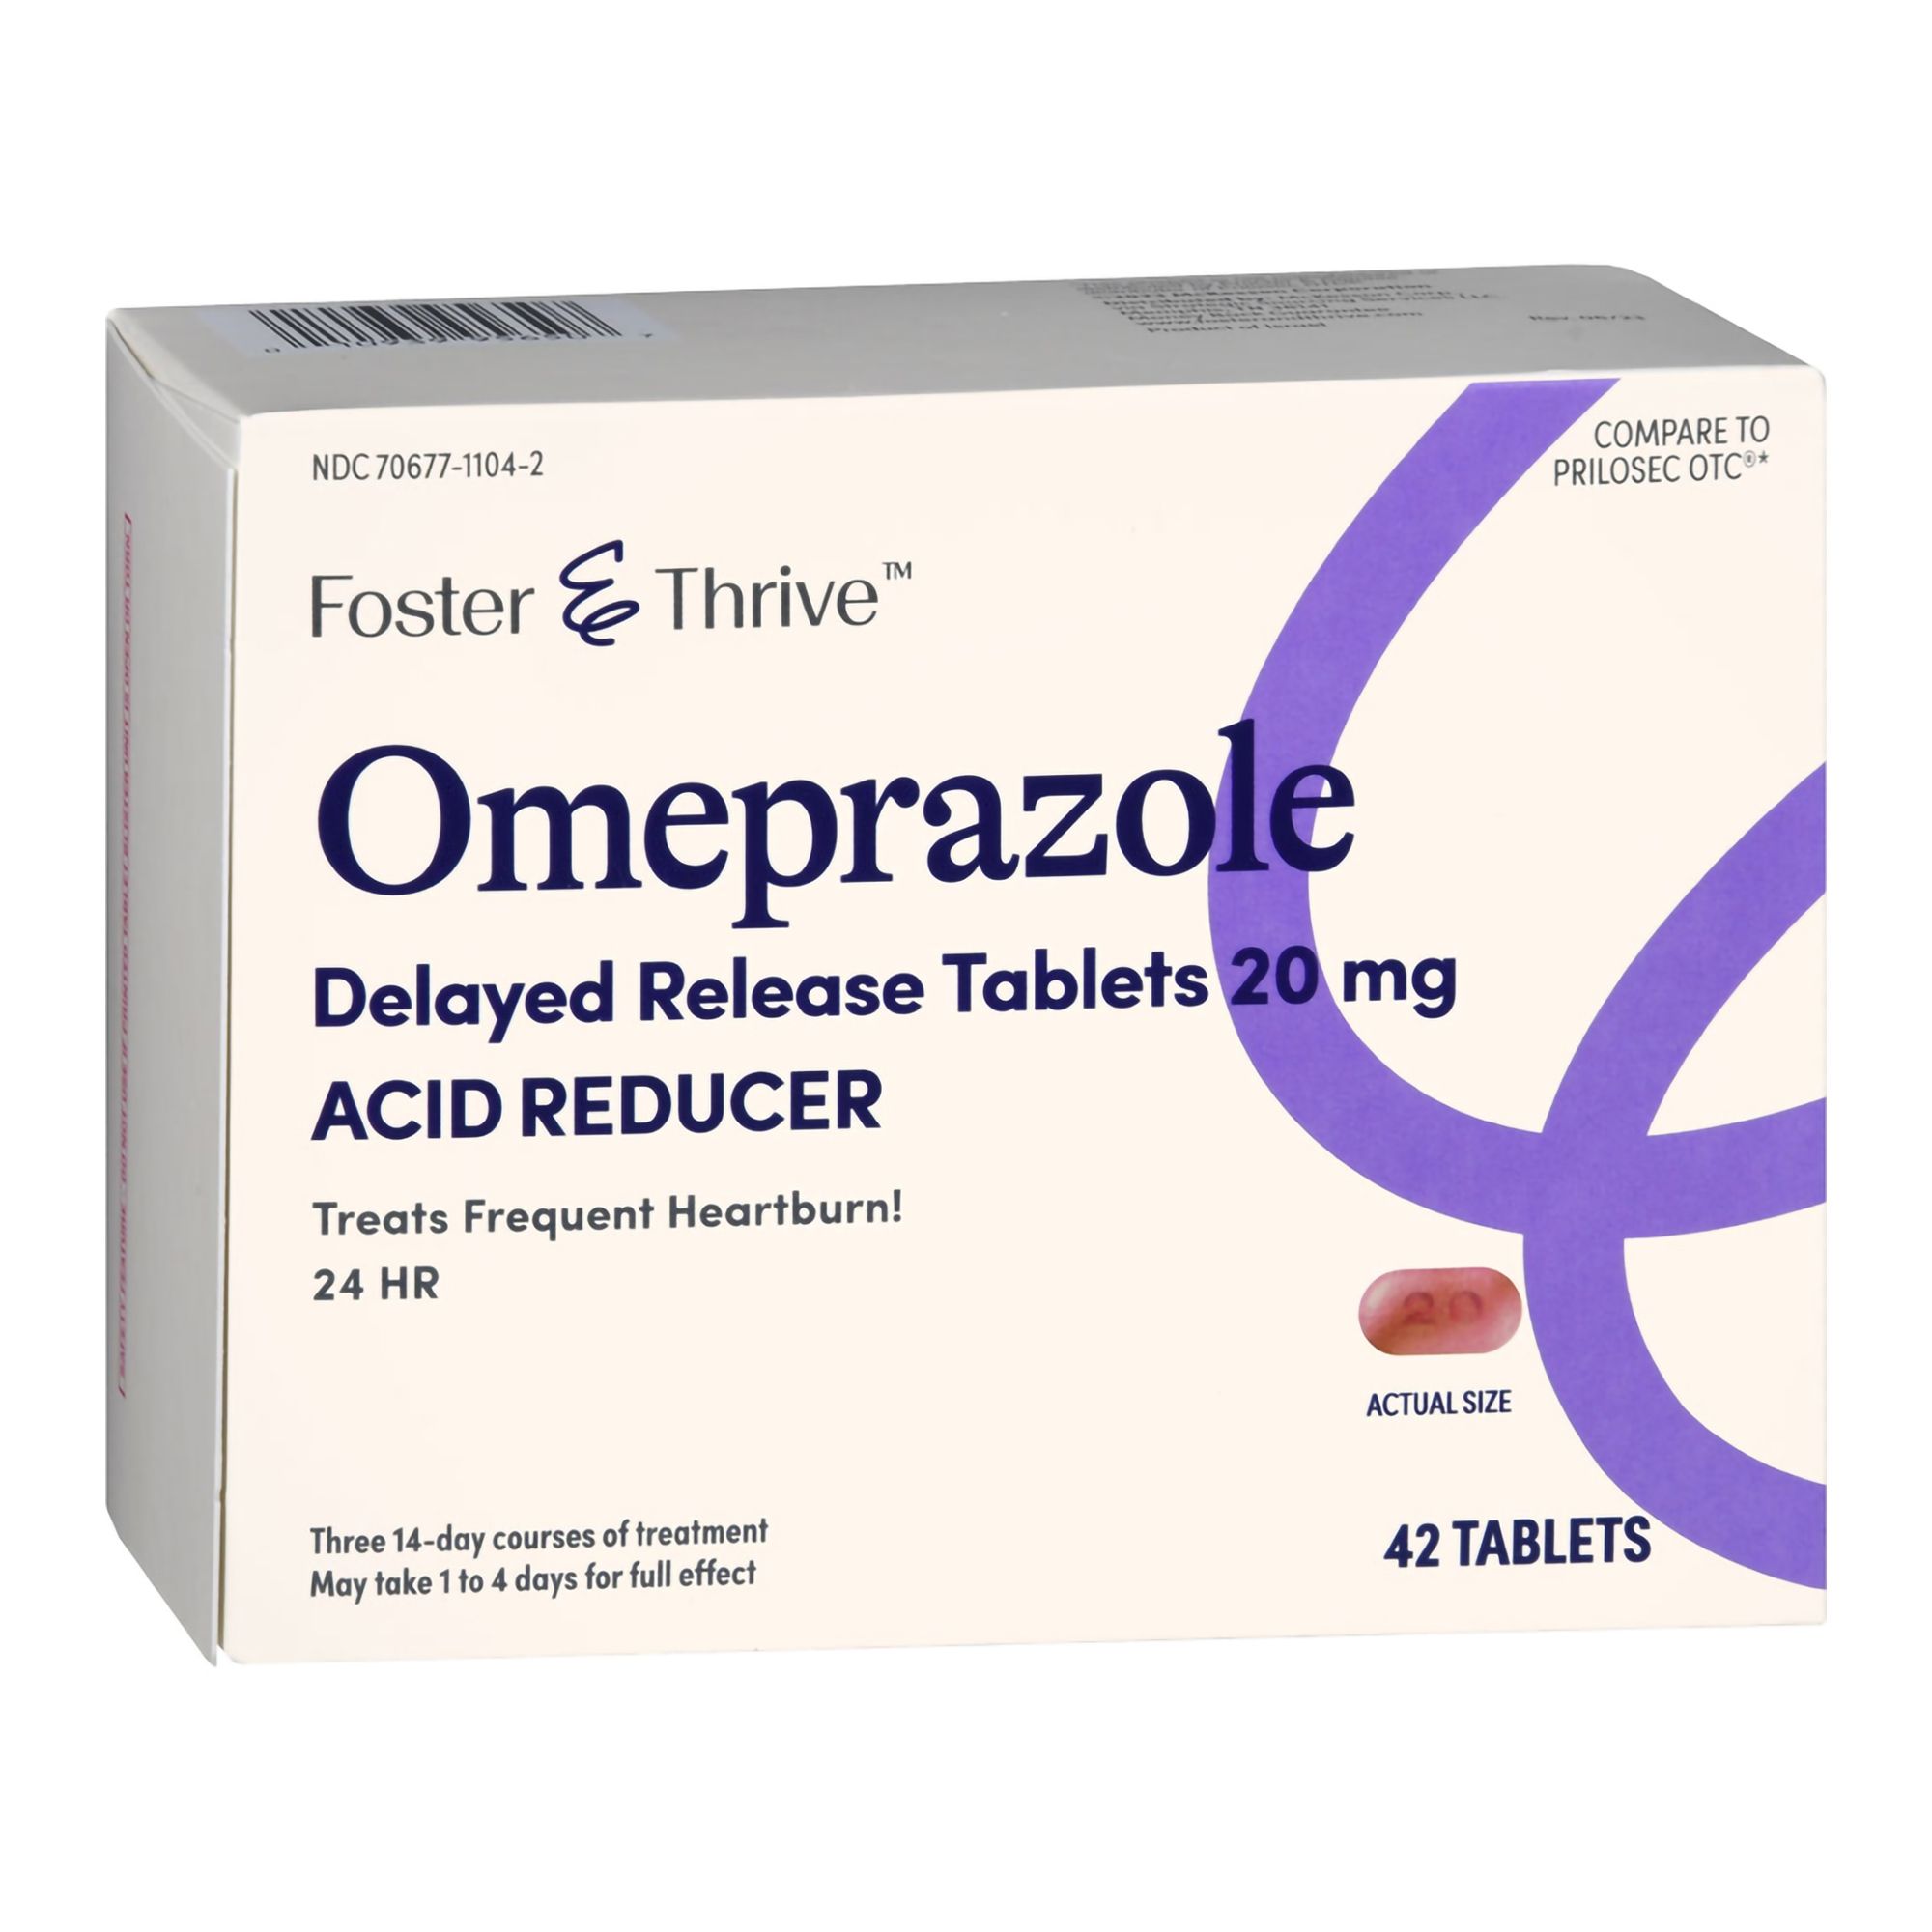 Foster & Thrive Omeprazole Delayed Release Acid Reducer Tablets, 20 mg - 42 ct